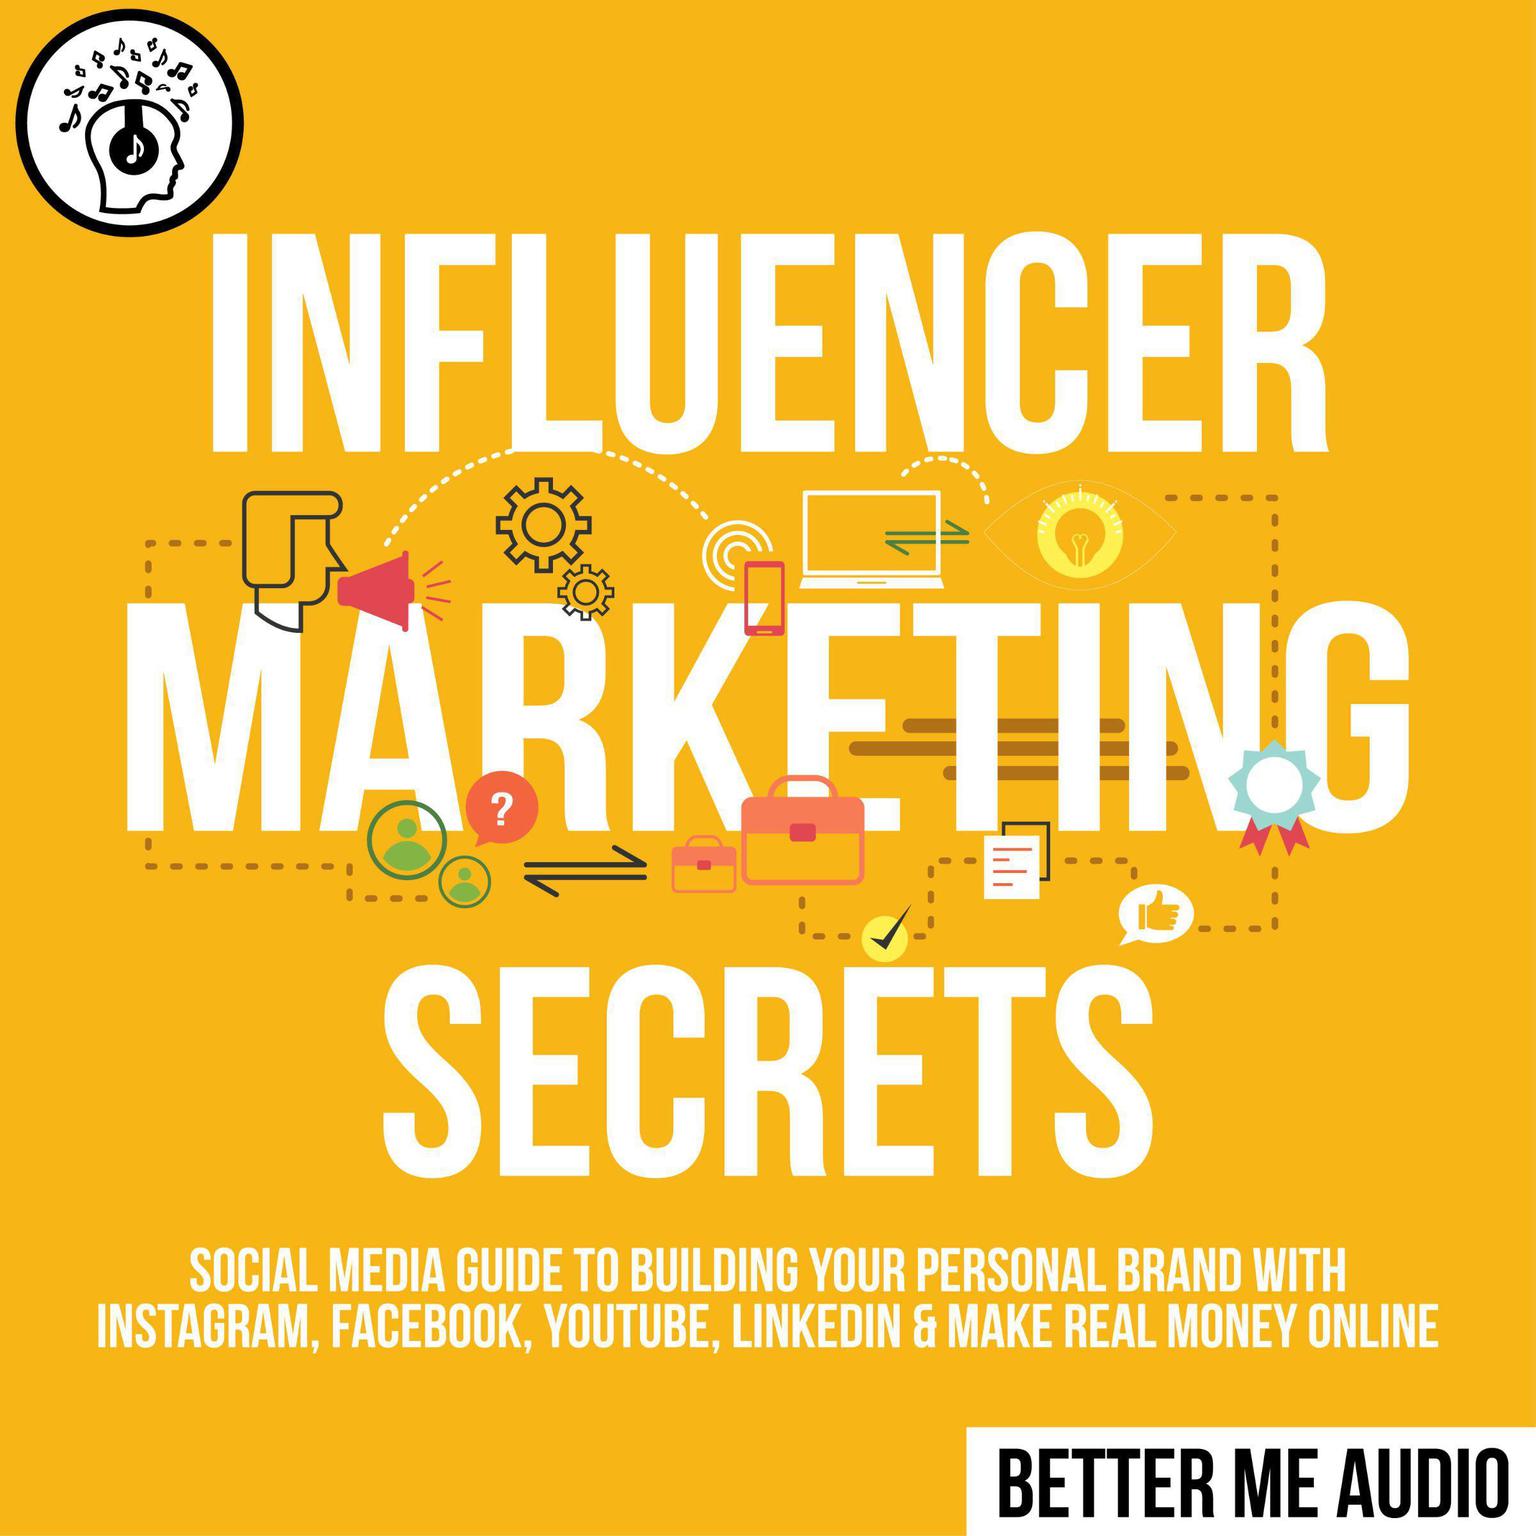 Influencer Marketing Secrets: Social Media Guide to Building Your Personal Brand With Instagram, Facebook, YouTube, LinkedIn & Make Real Money Online Audiobook, by Better Me Audio